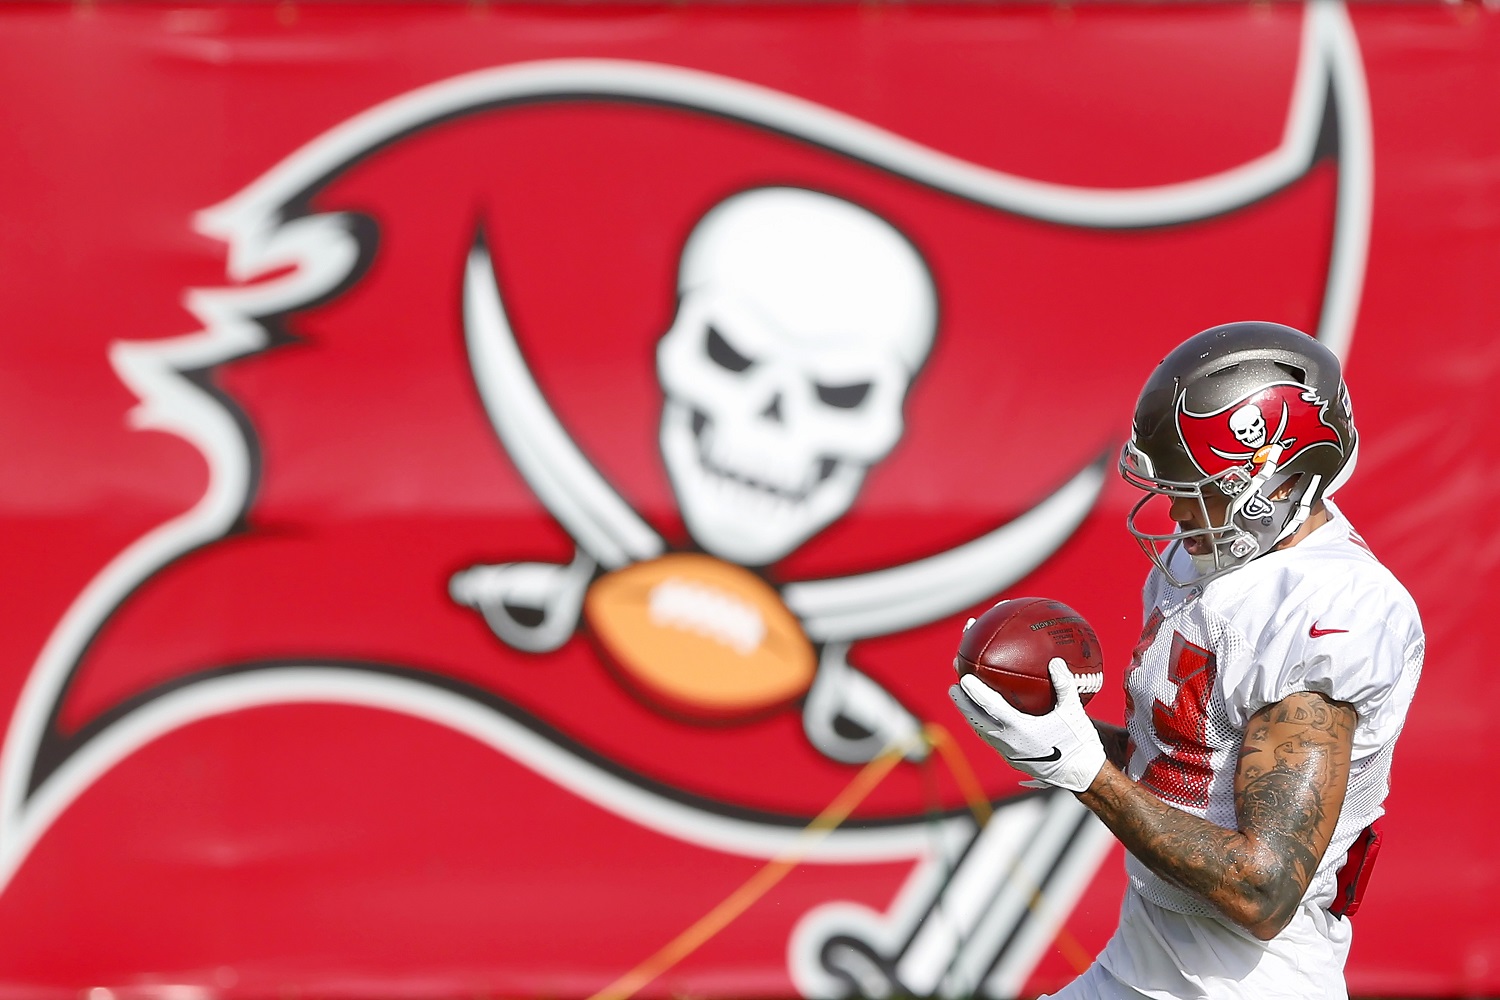 Malcolm Glazer's Family Owns the NFL’s Tampa Bay Buccaneers